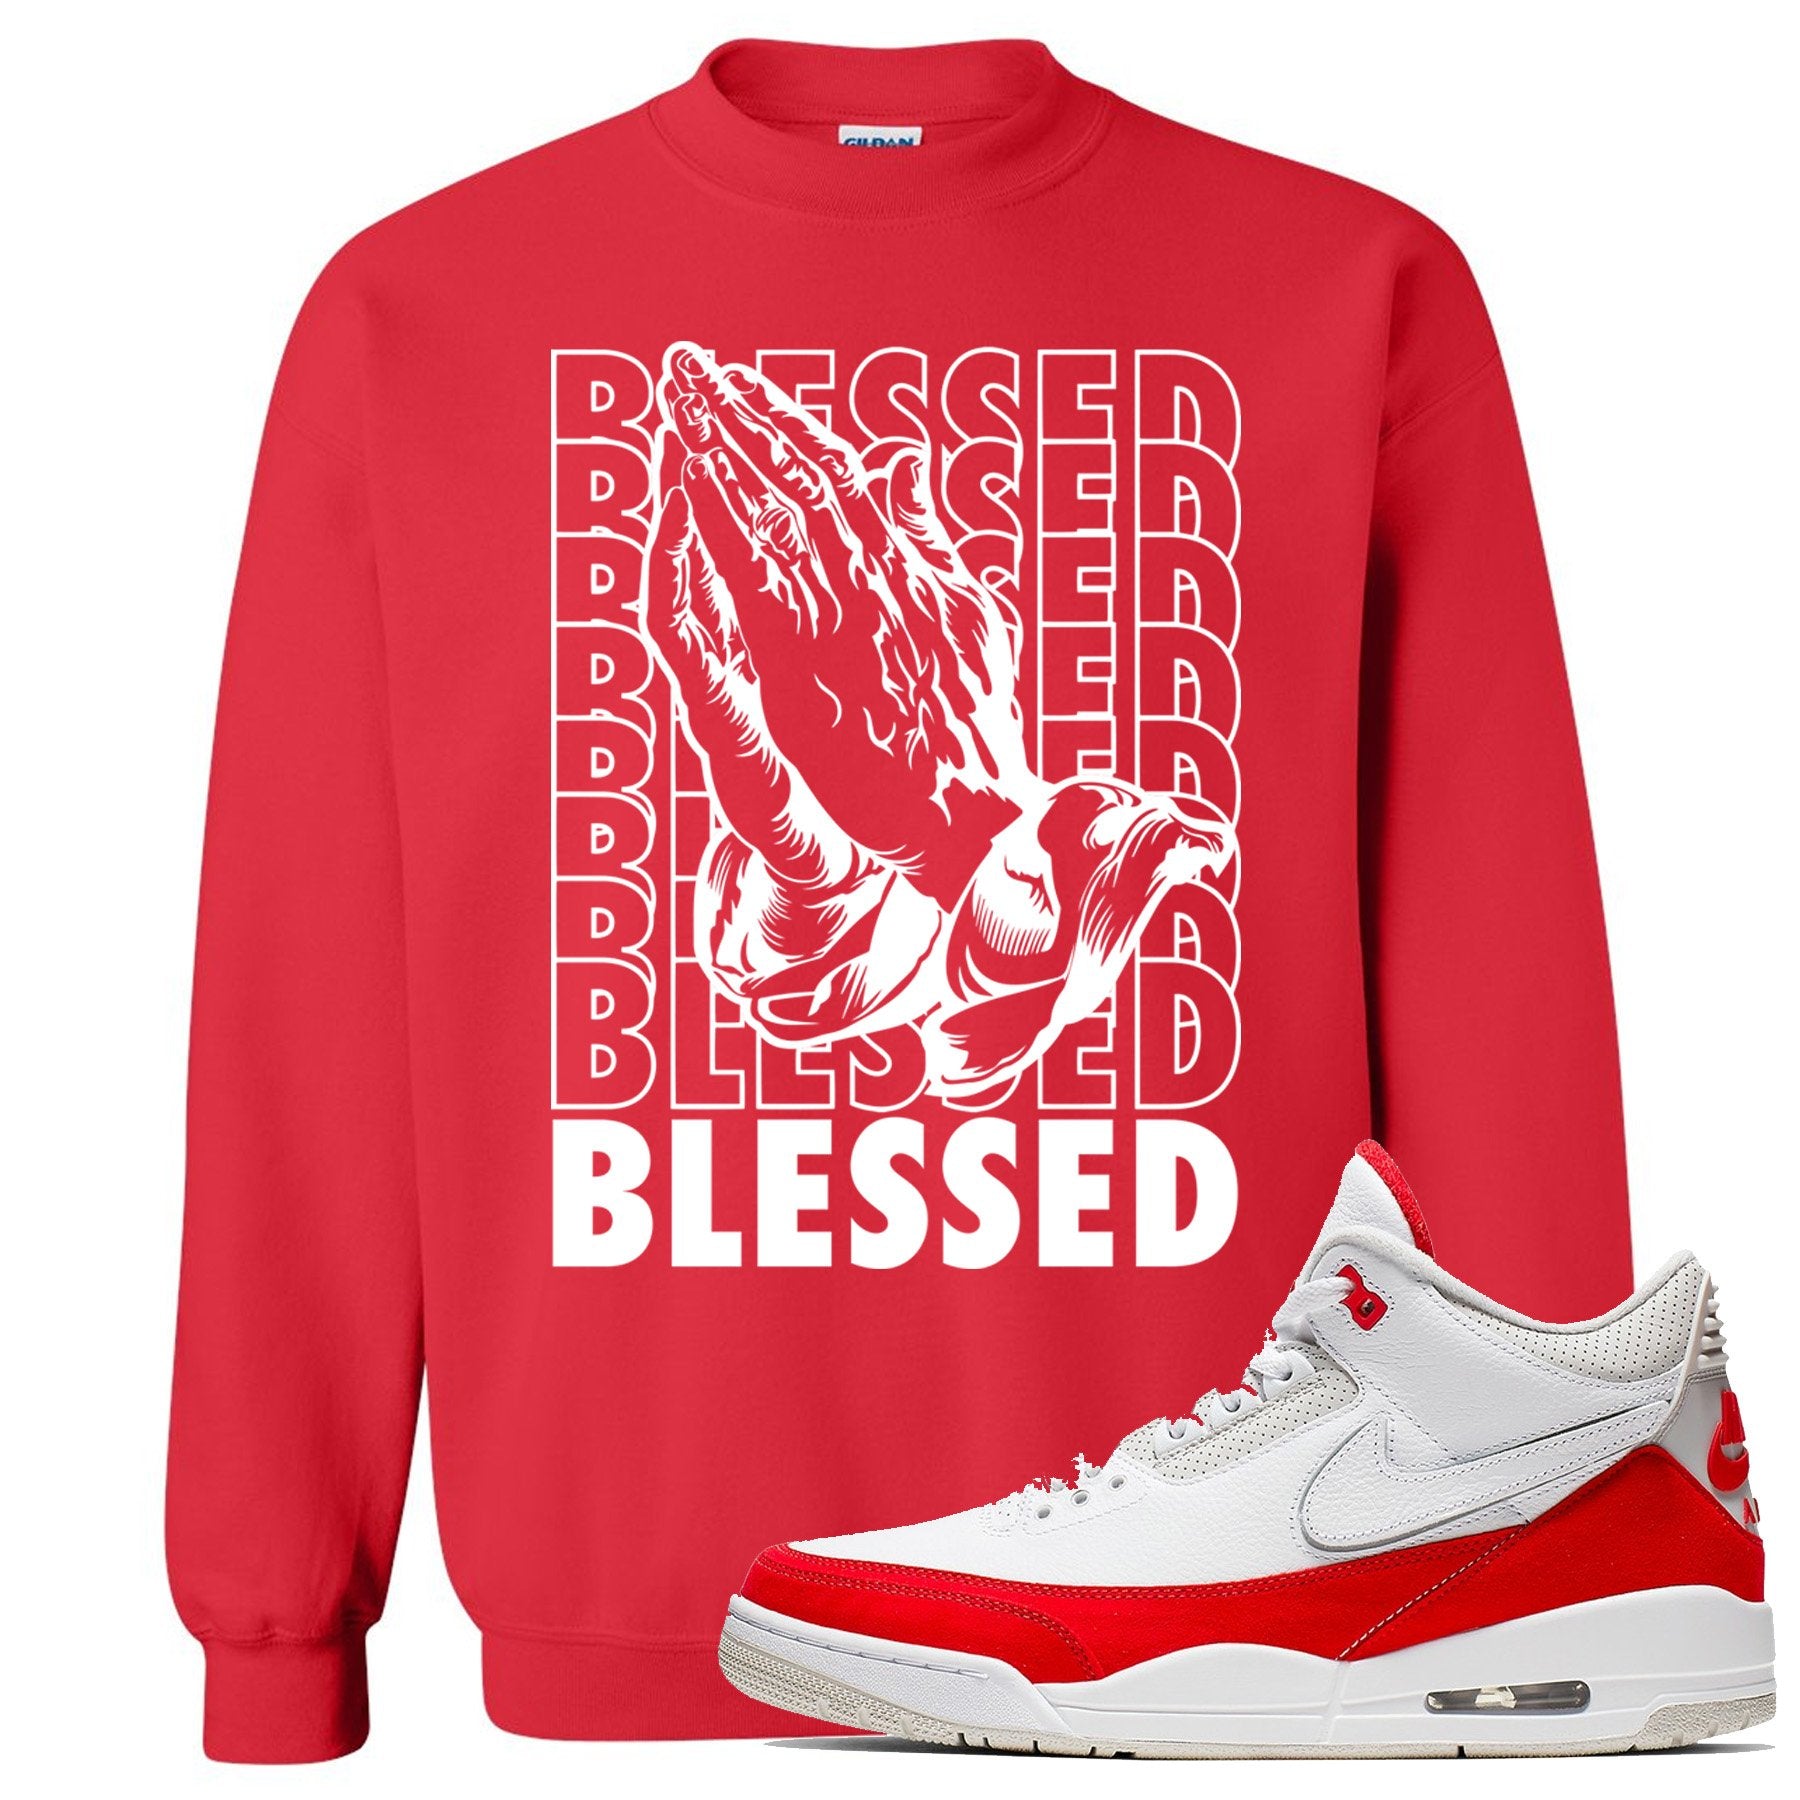 This red and white sweater will match great with your Jordan 3 Tinker Air Max shoes